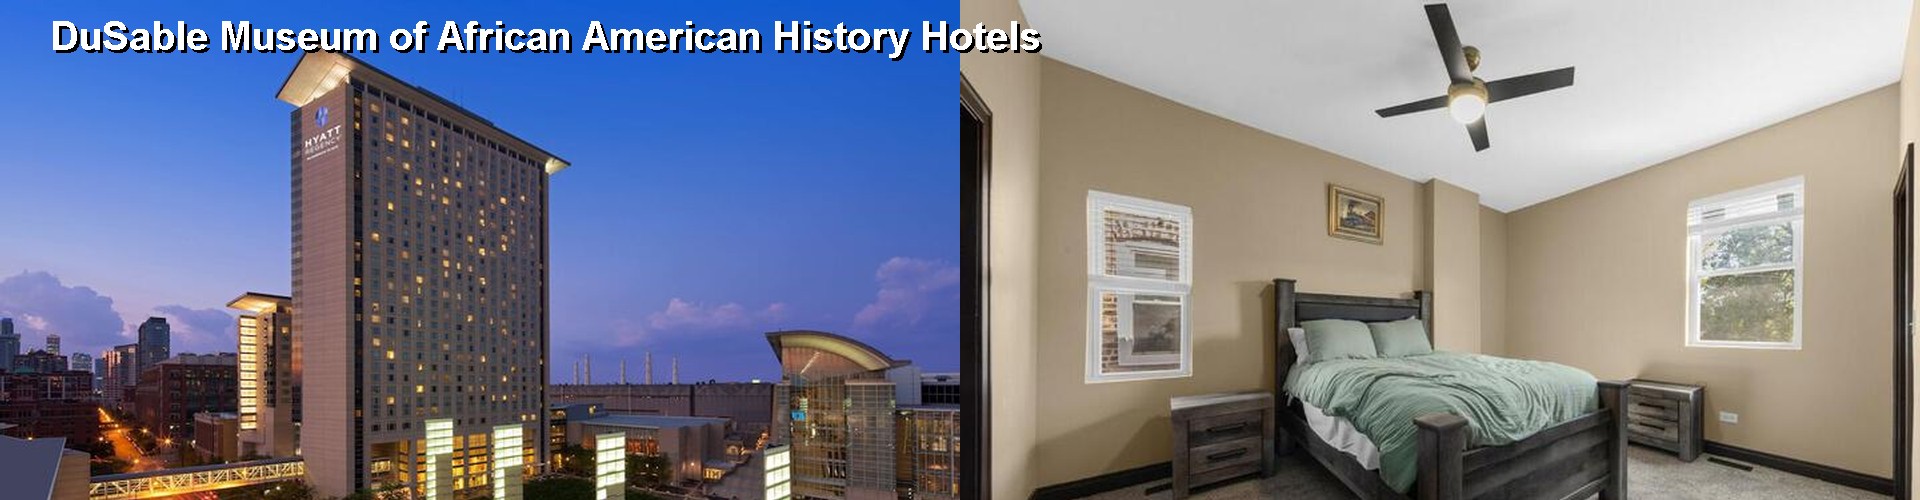 5 Best Hotels near DuSable Museum of African American History